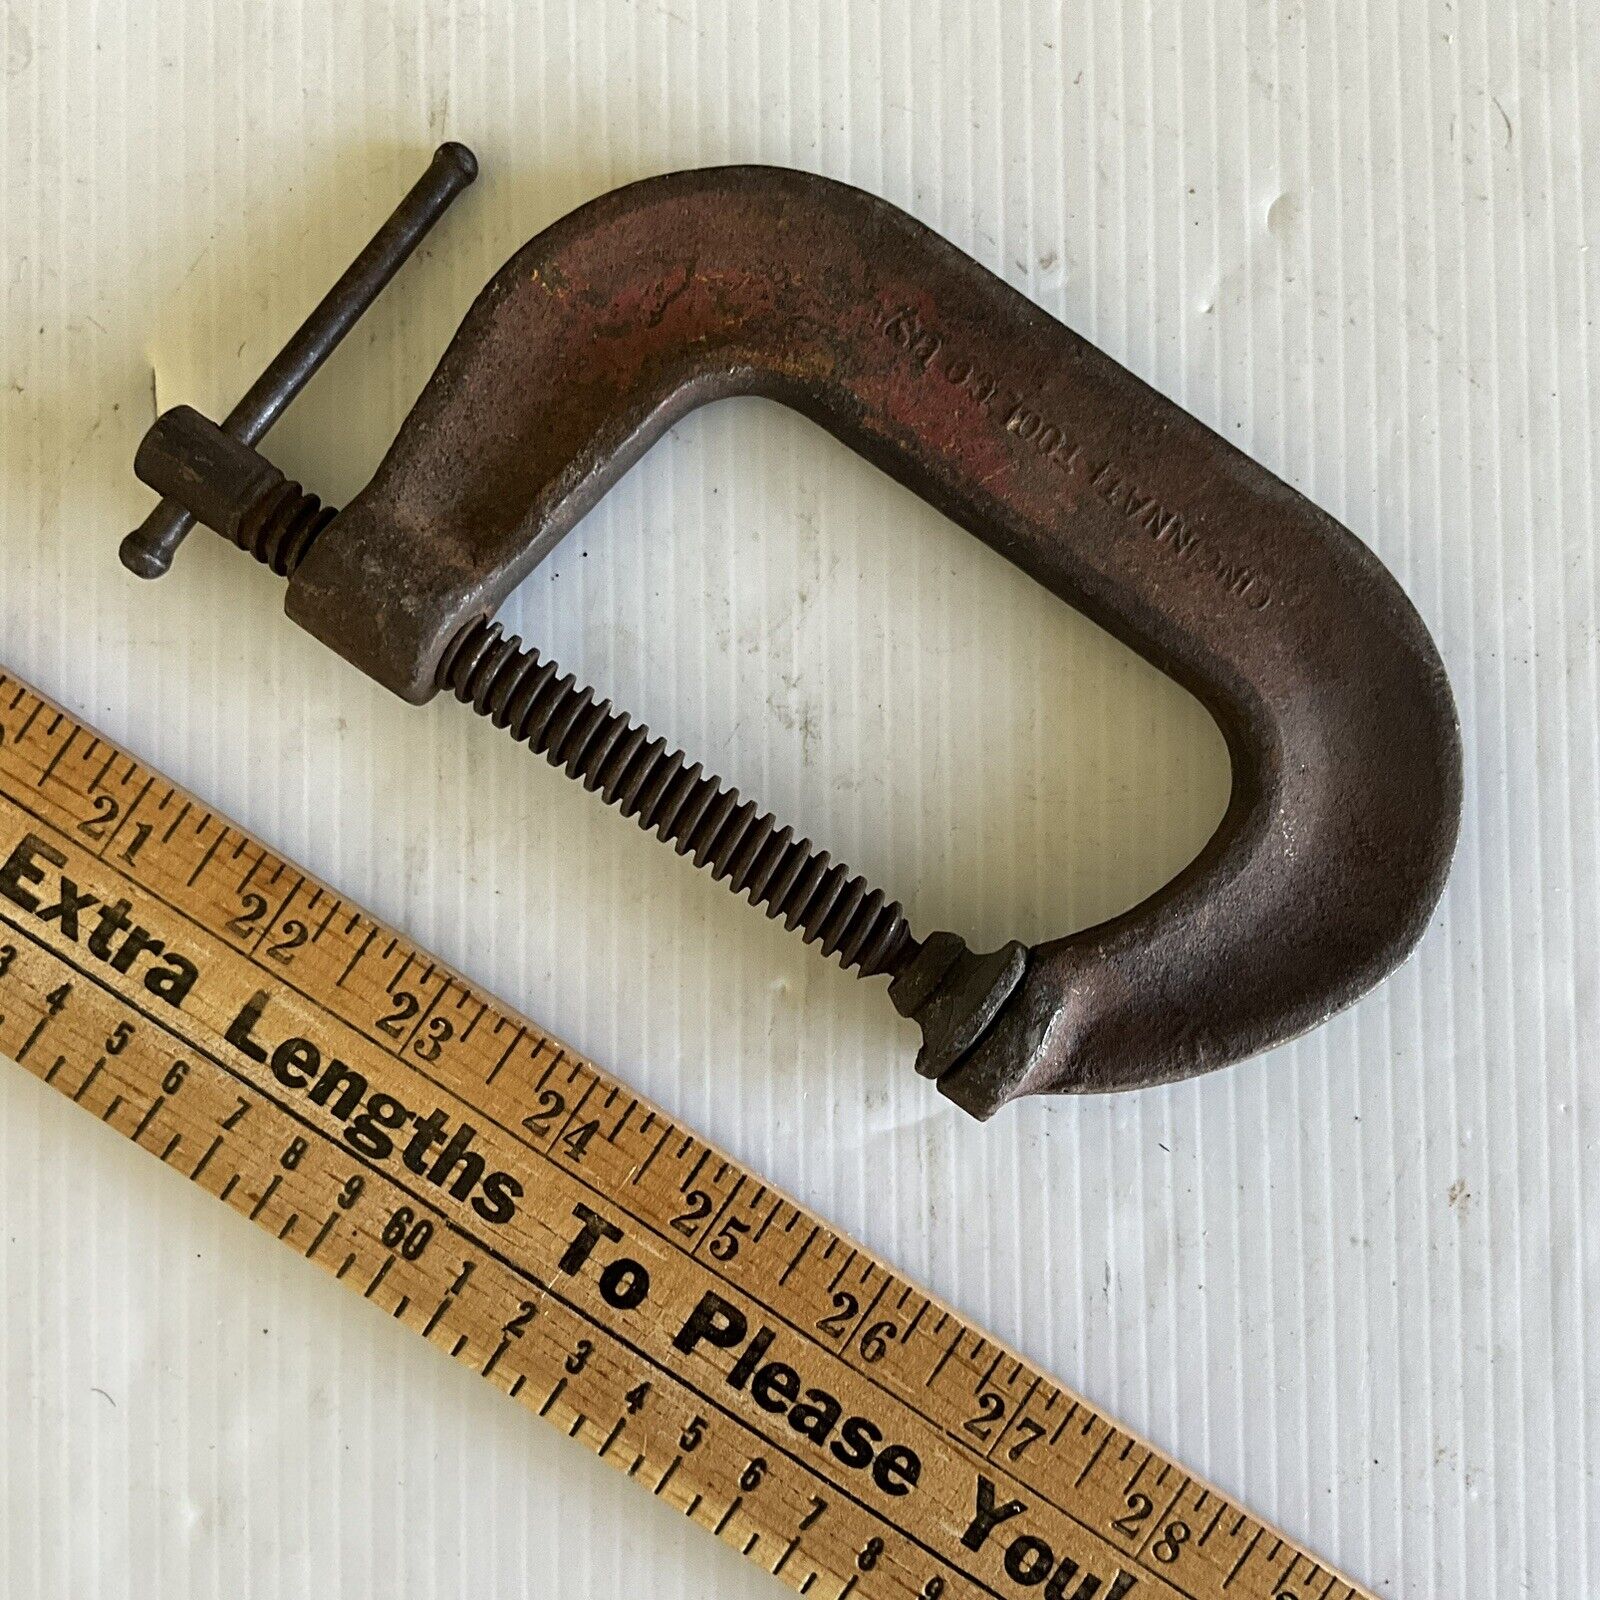 Vintage Hargrave 3 - No. 44 Super Clamp - Cincinnati Tool Co. - Made in USA